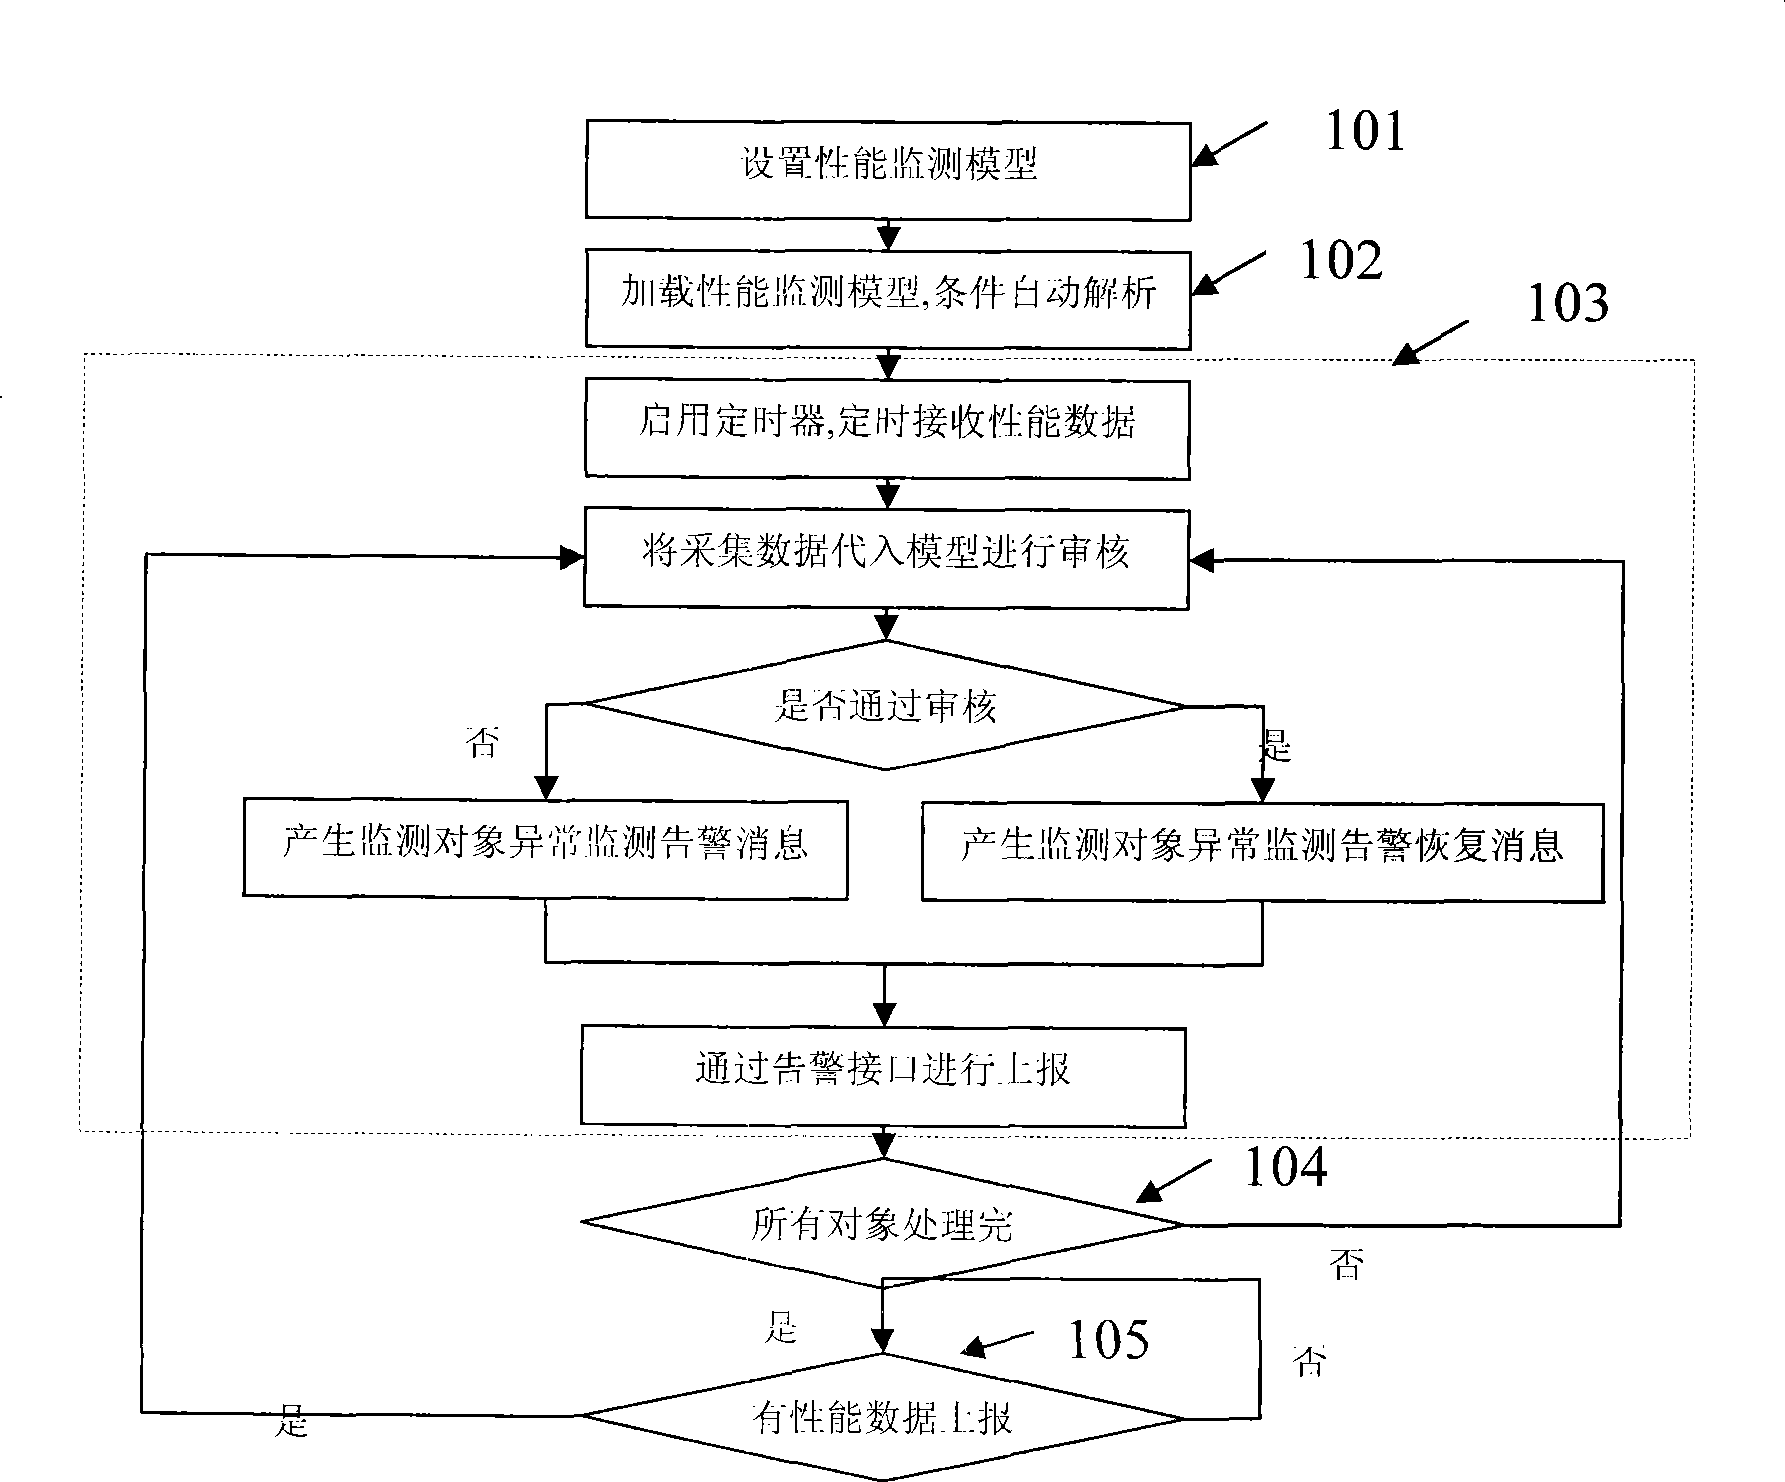 Method for network exception condition monitoring through performance data